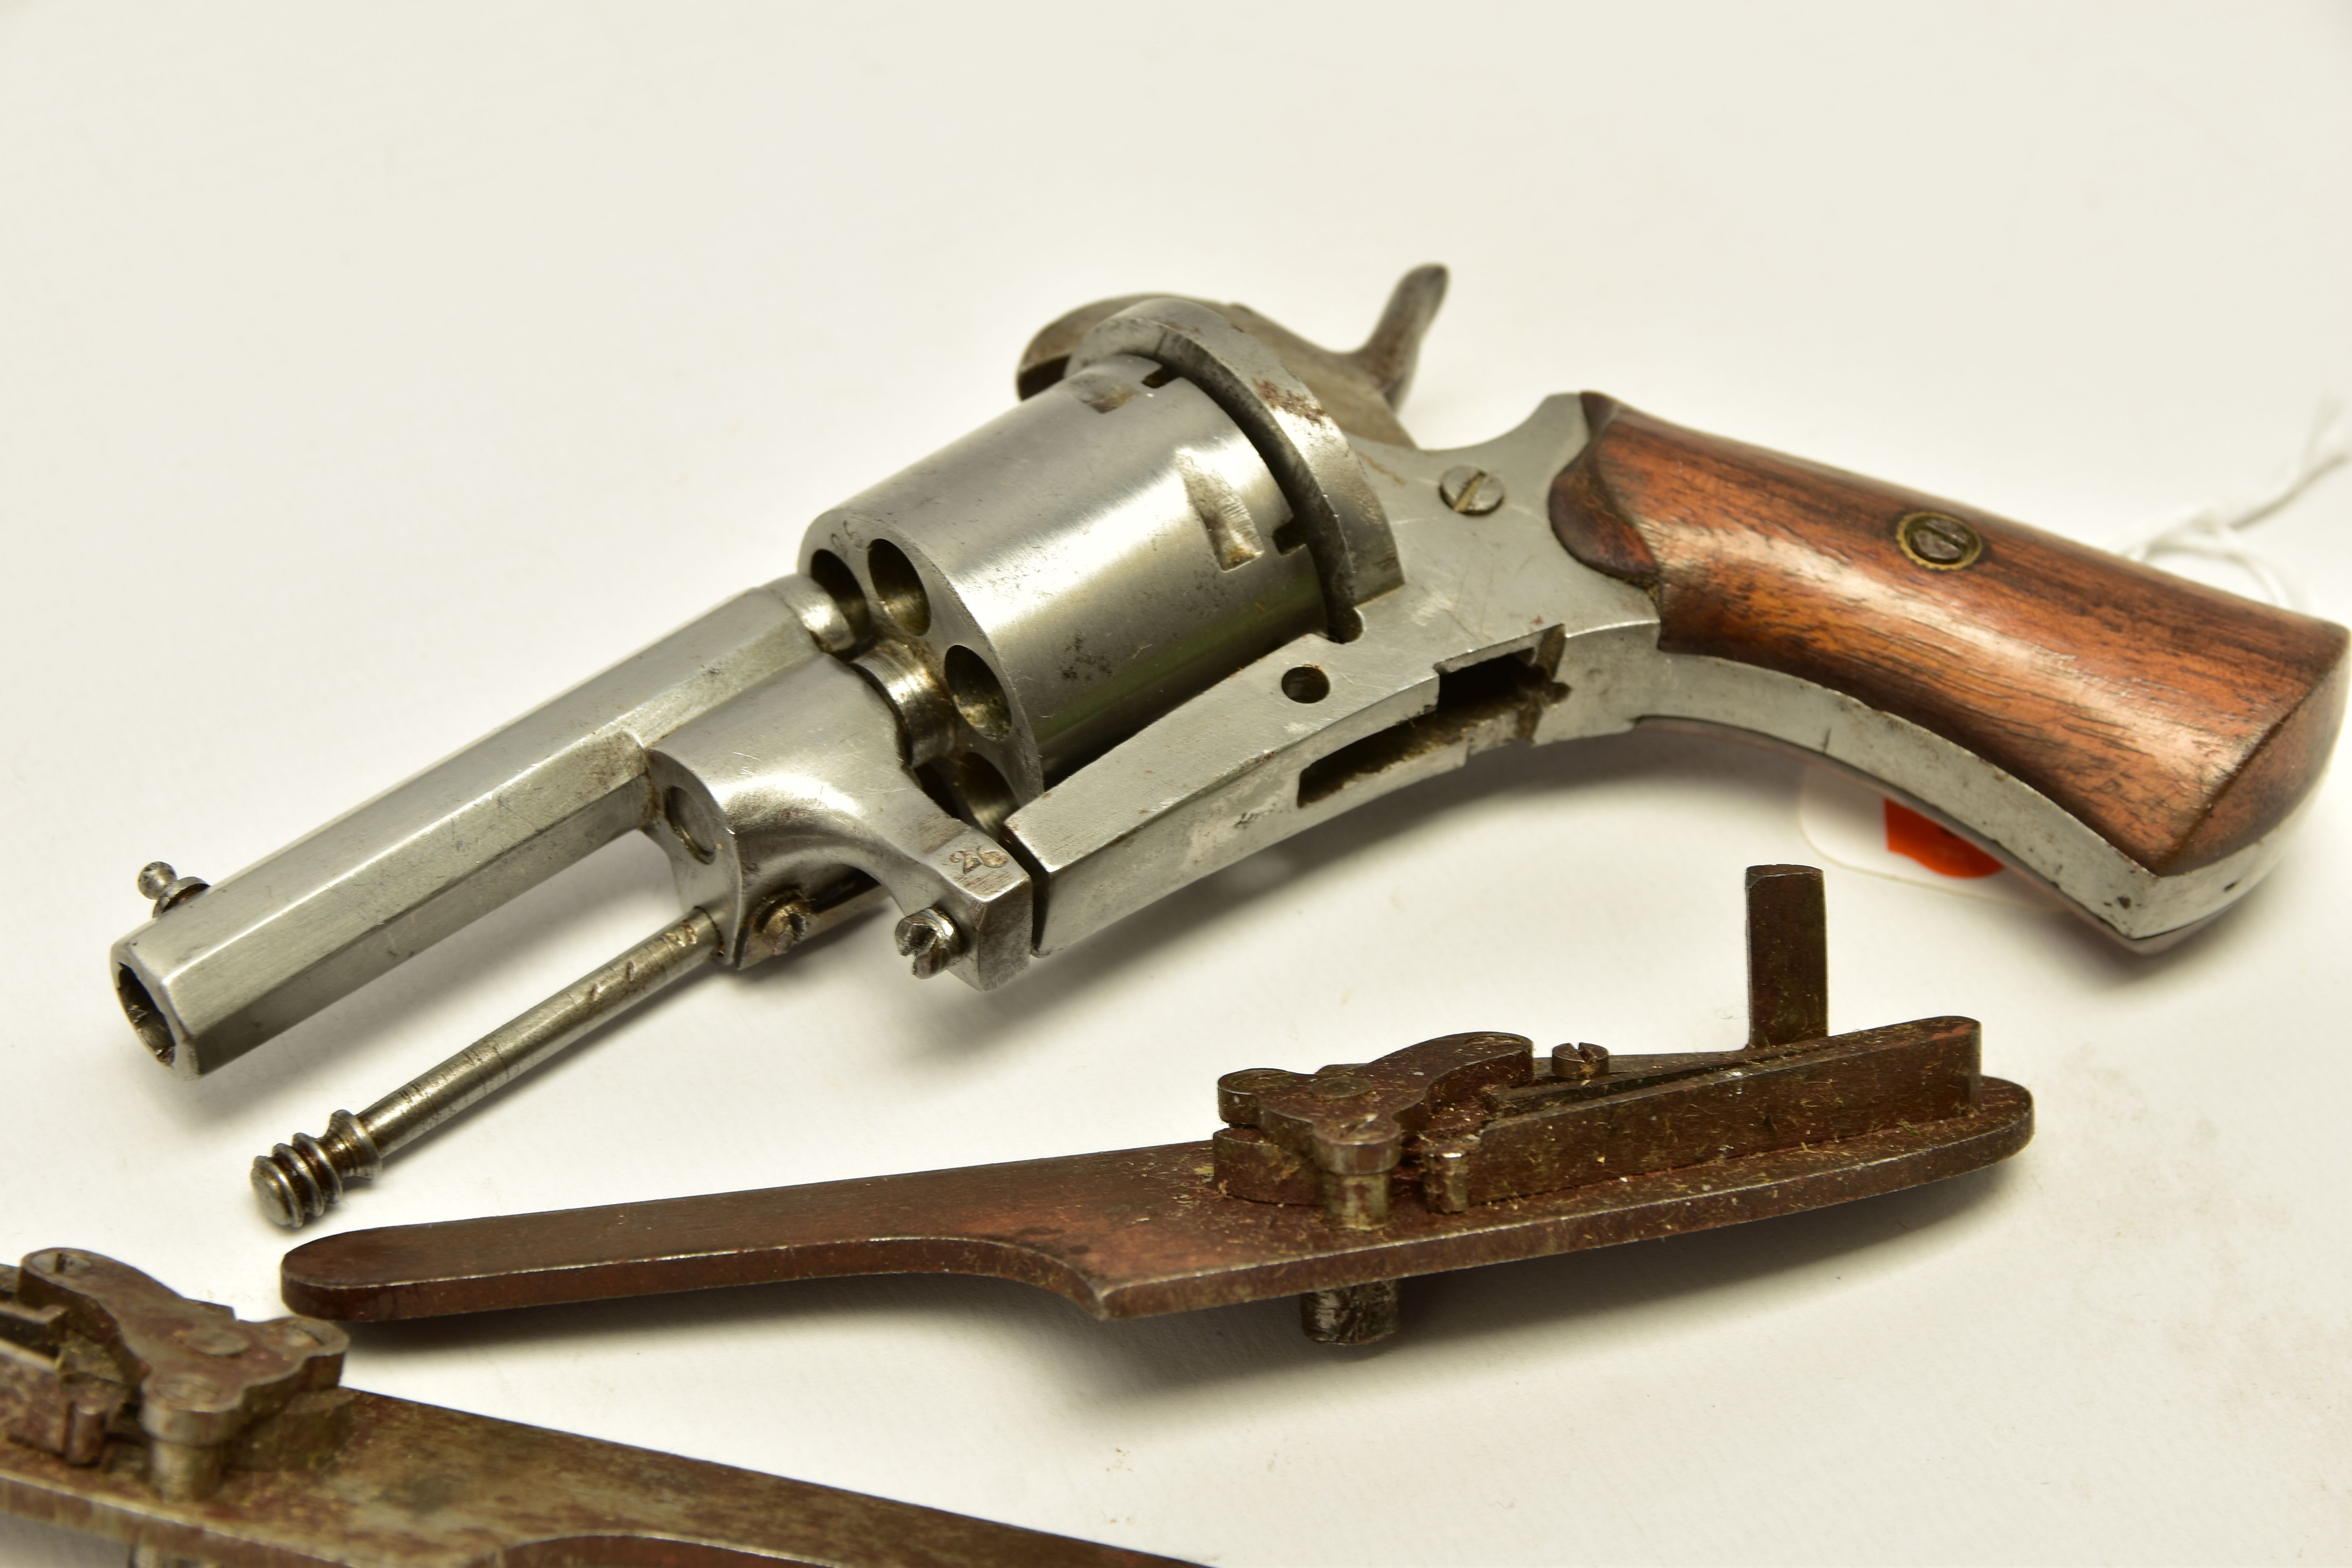 AN ANTIQUE 7MM BELGIAN PROVED PIN-FIRE REVOLVER, partly dismantled and missing its loading gate - Image 2 of 7